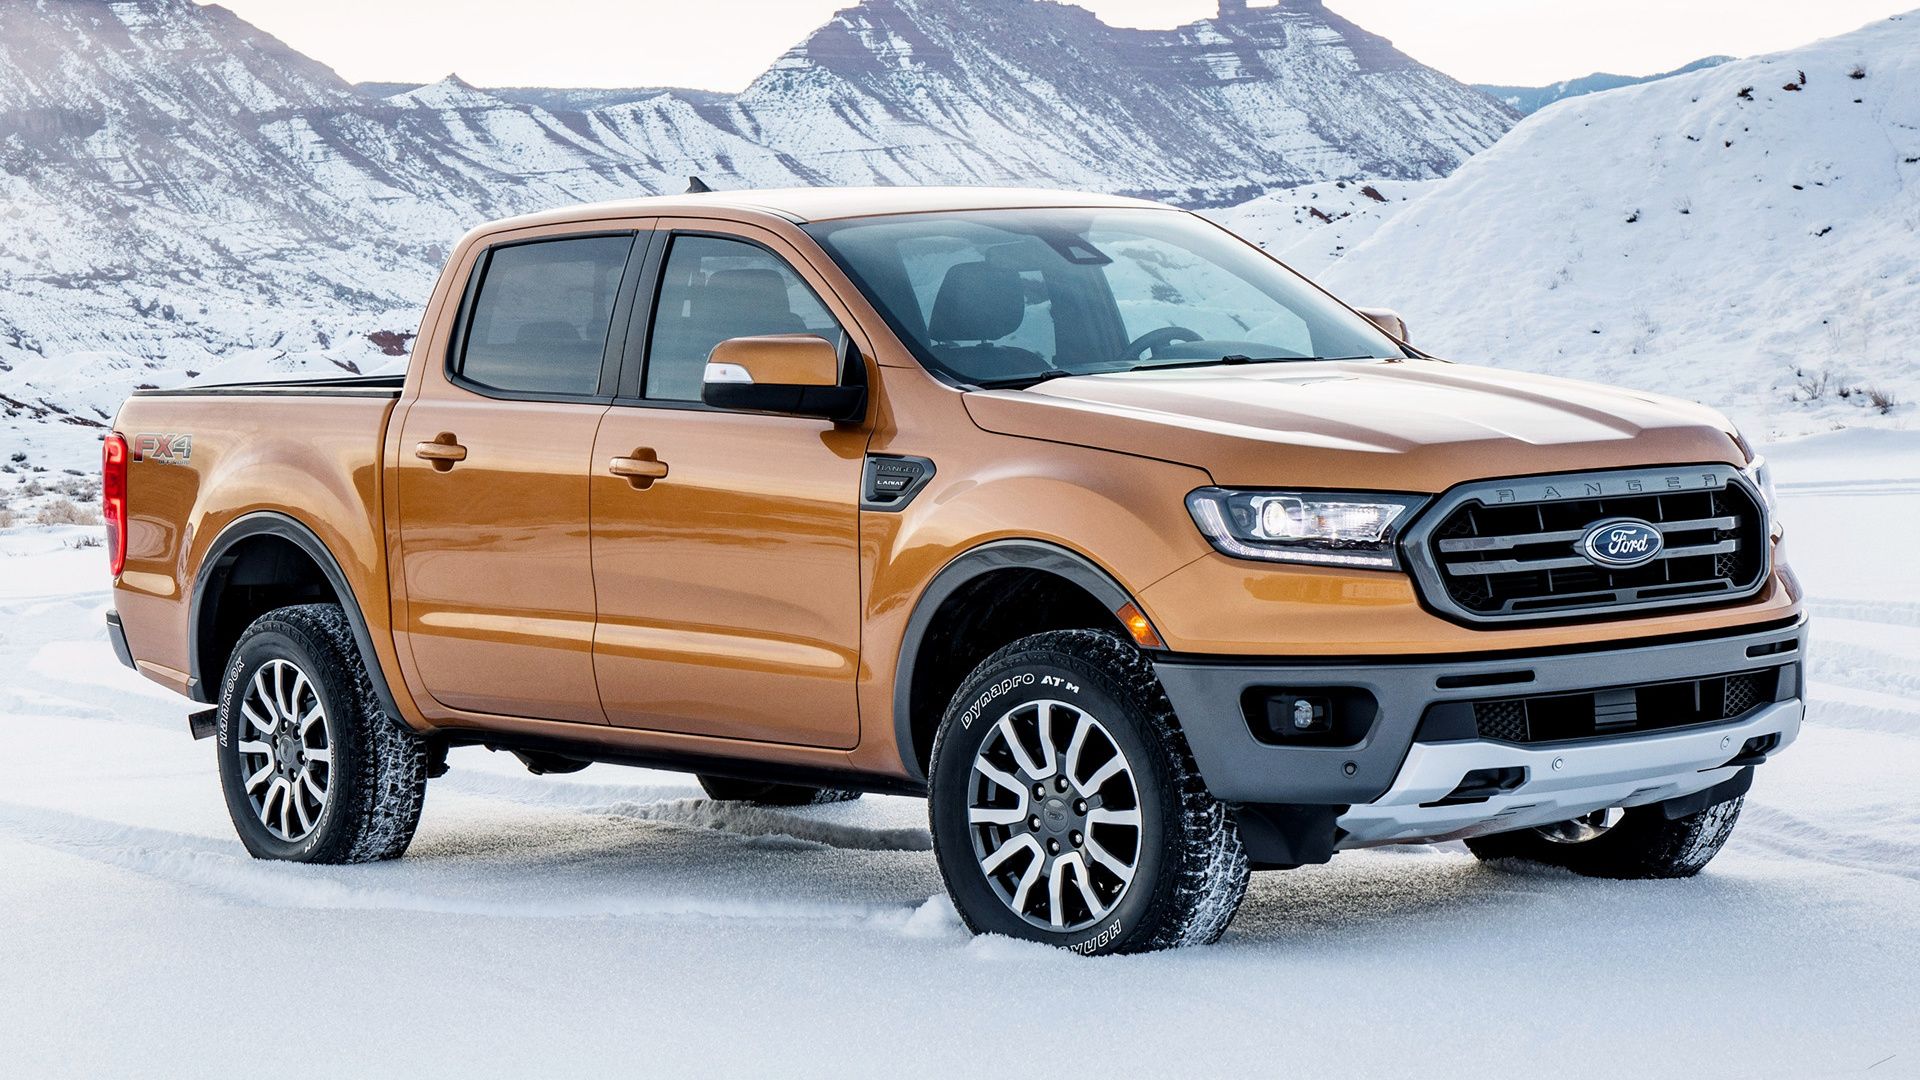 Ford Ranger Lariat FX4 SuperCrew (US) and HD Image